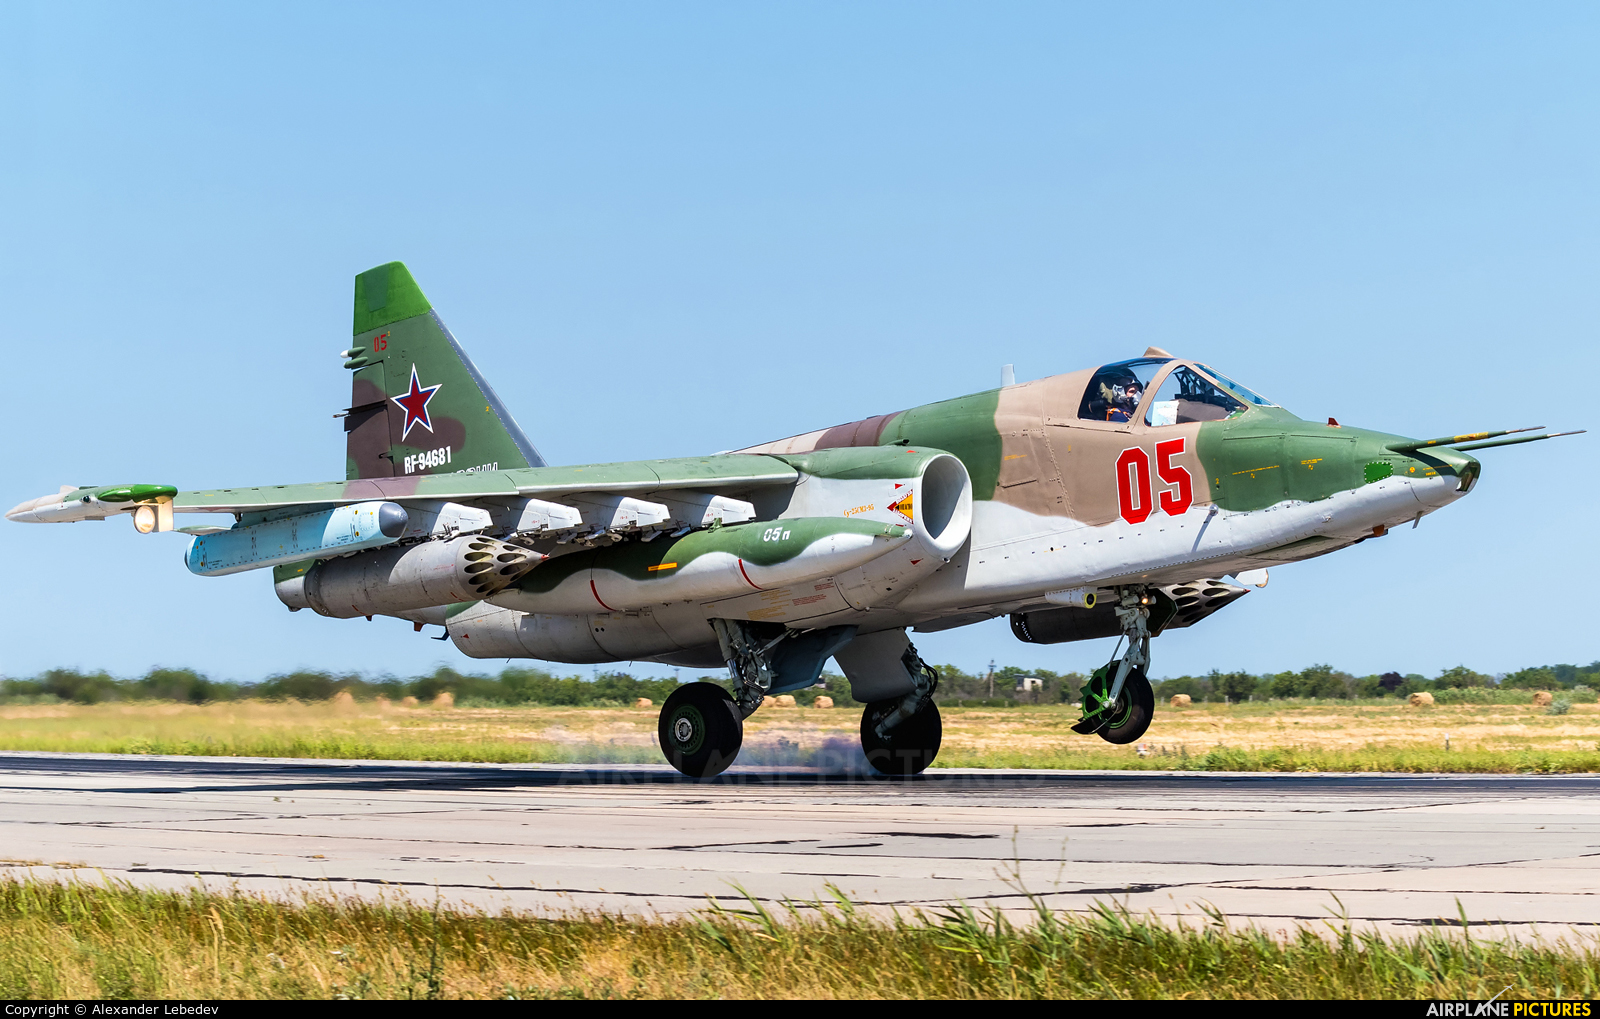 Russia - Air Force 05 aircraft at Undisclosed Location